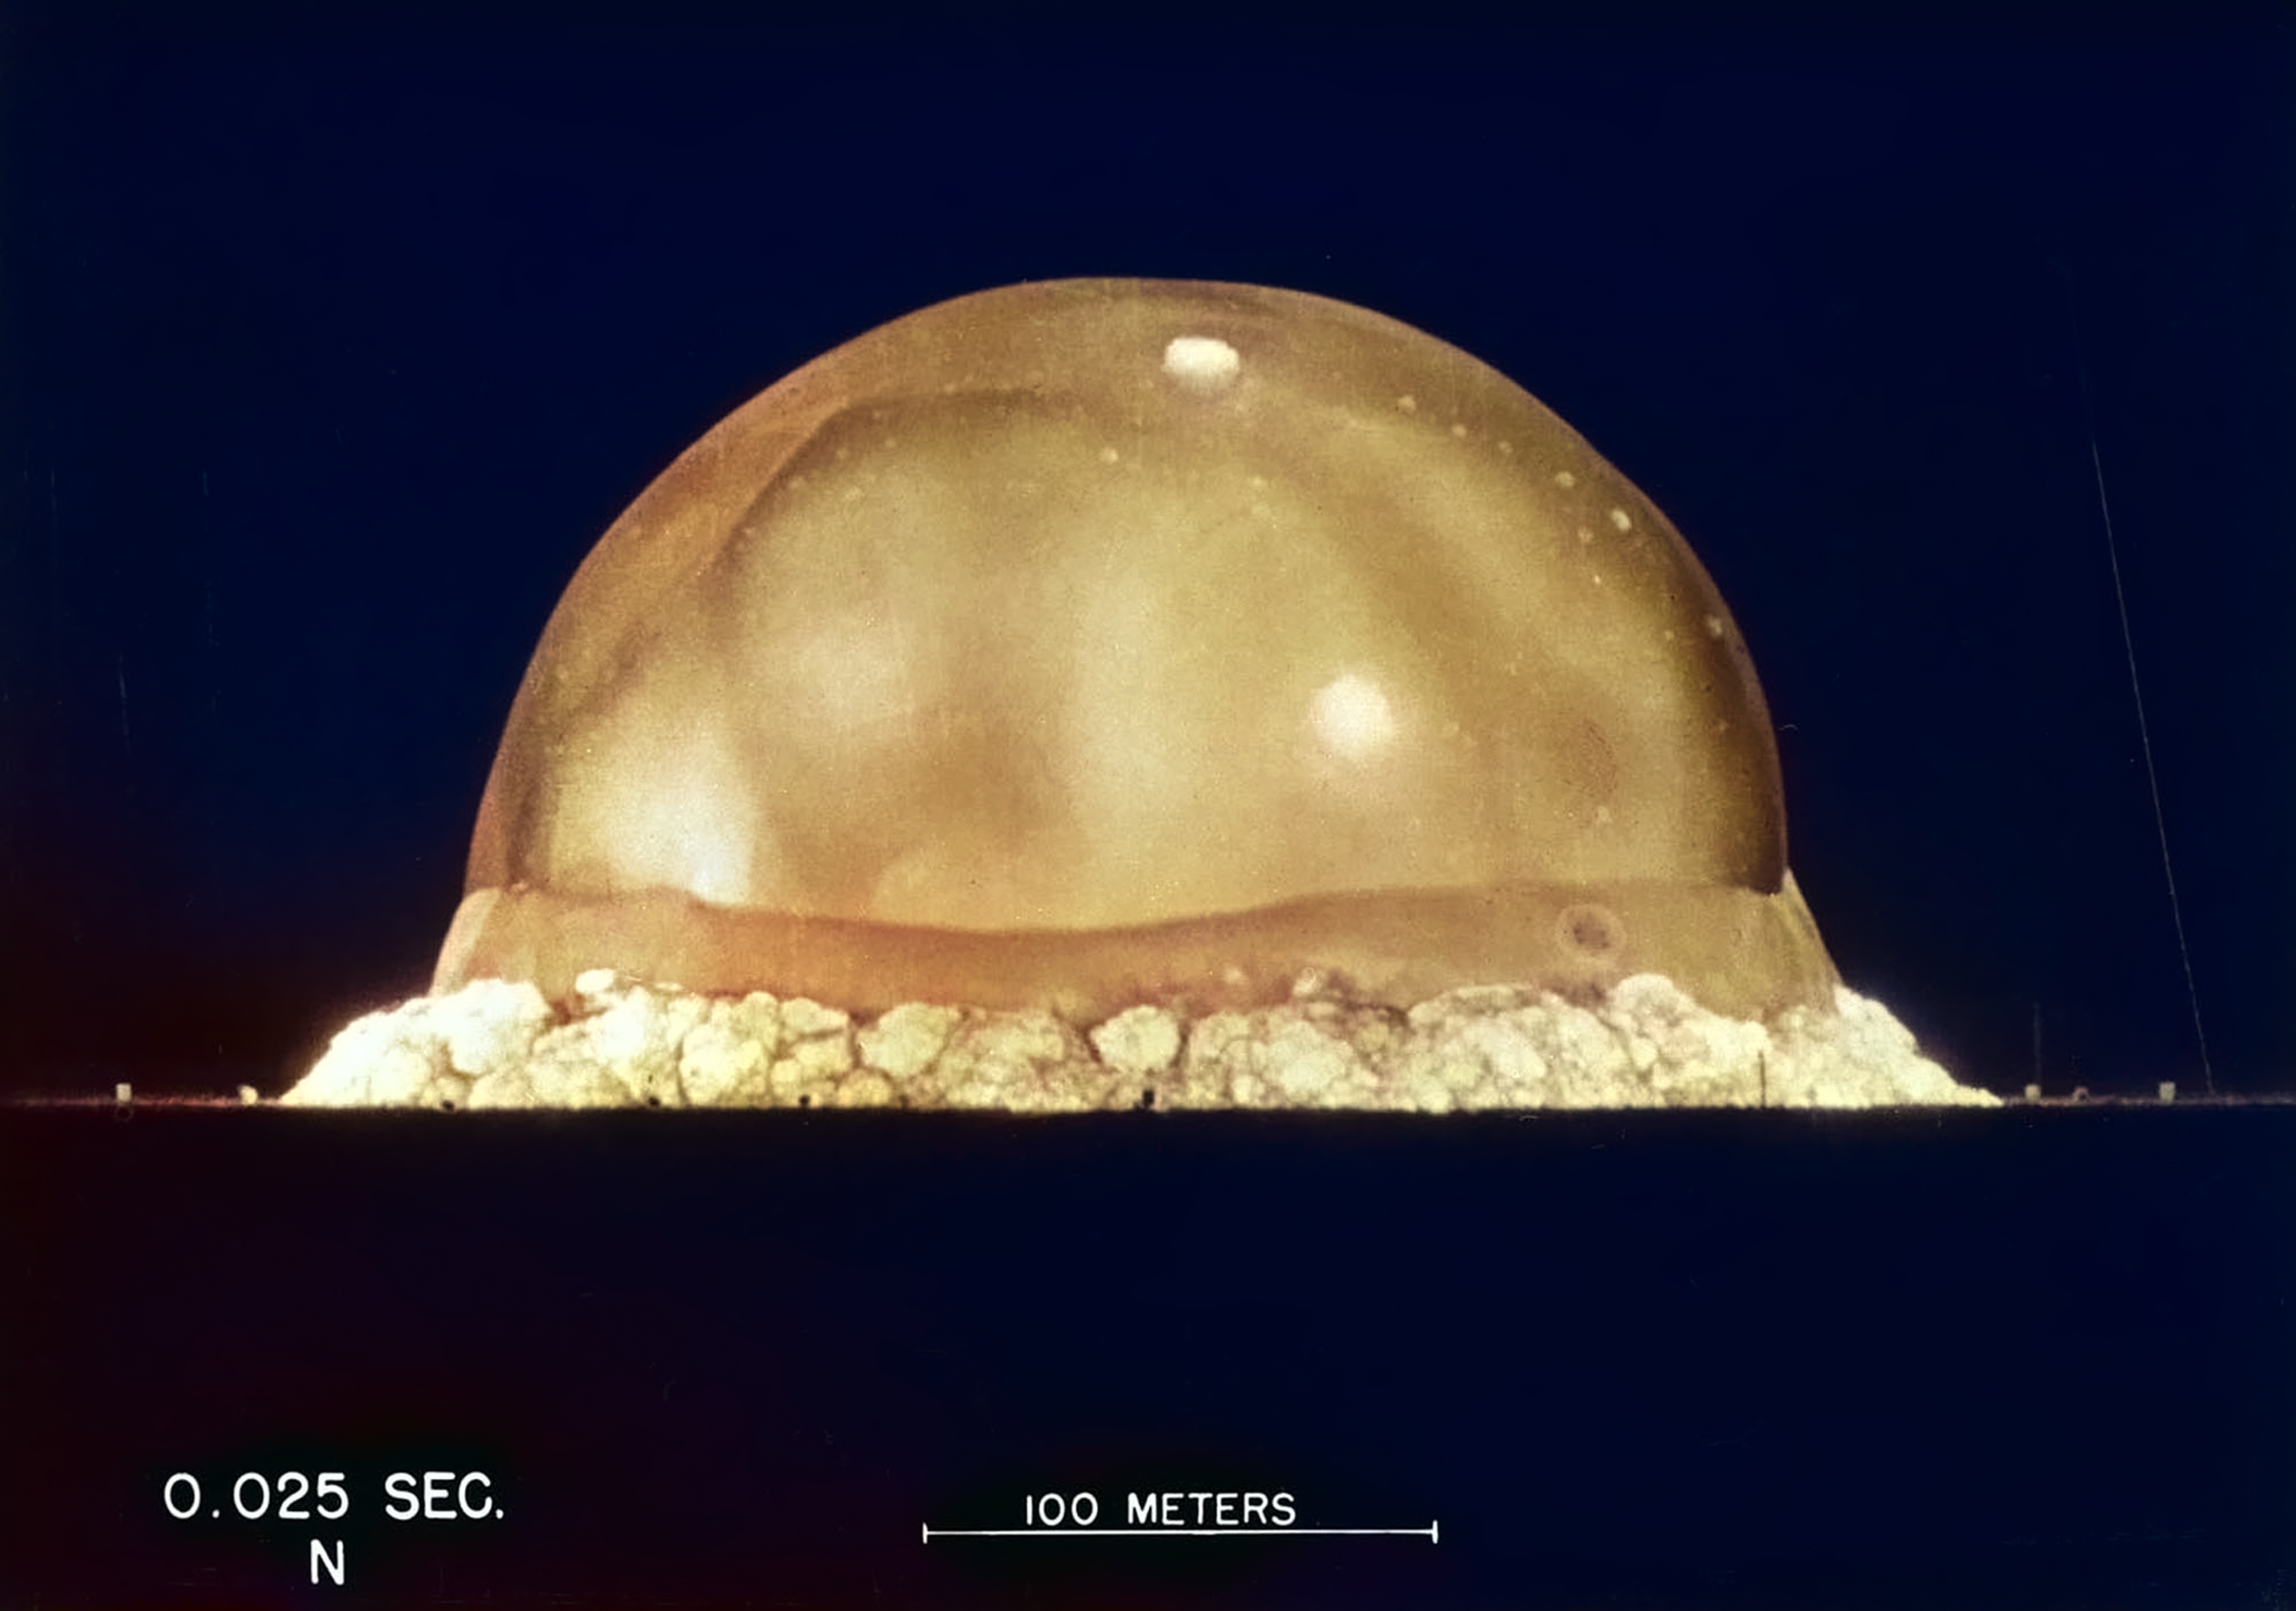 The Trinity explosion, 16 milliseconds after detonation. The viewed hemisphere’s highest point in this image is about 660 ft. (Berlyn Brixner / Los Alamos National Laboratory / Public Domain)